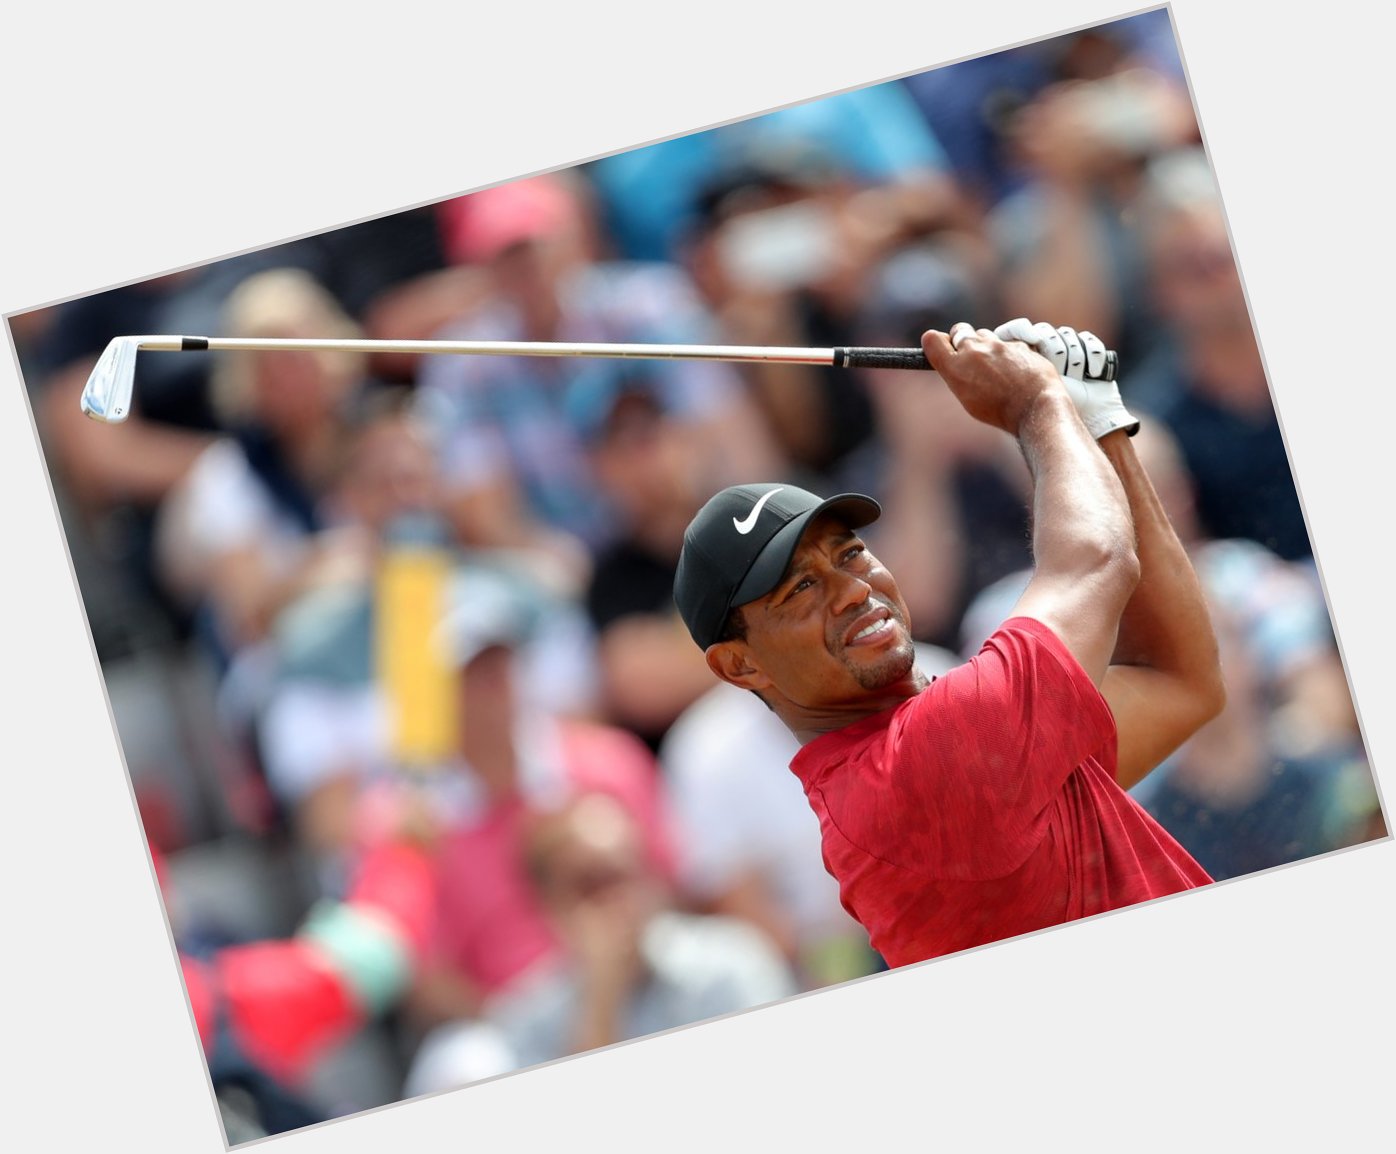 Happy Birthday to Tiger Woods  5x Masters 4x PGA Championship 3x US Open

The GOAT? 